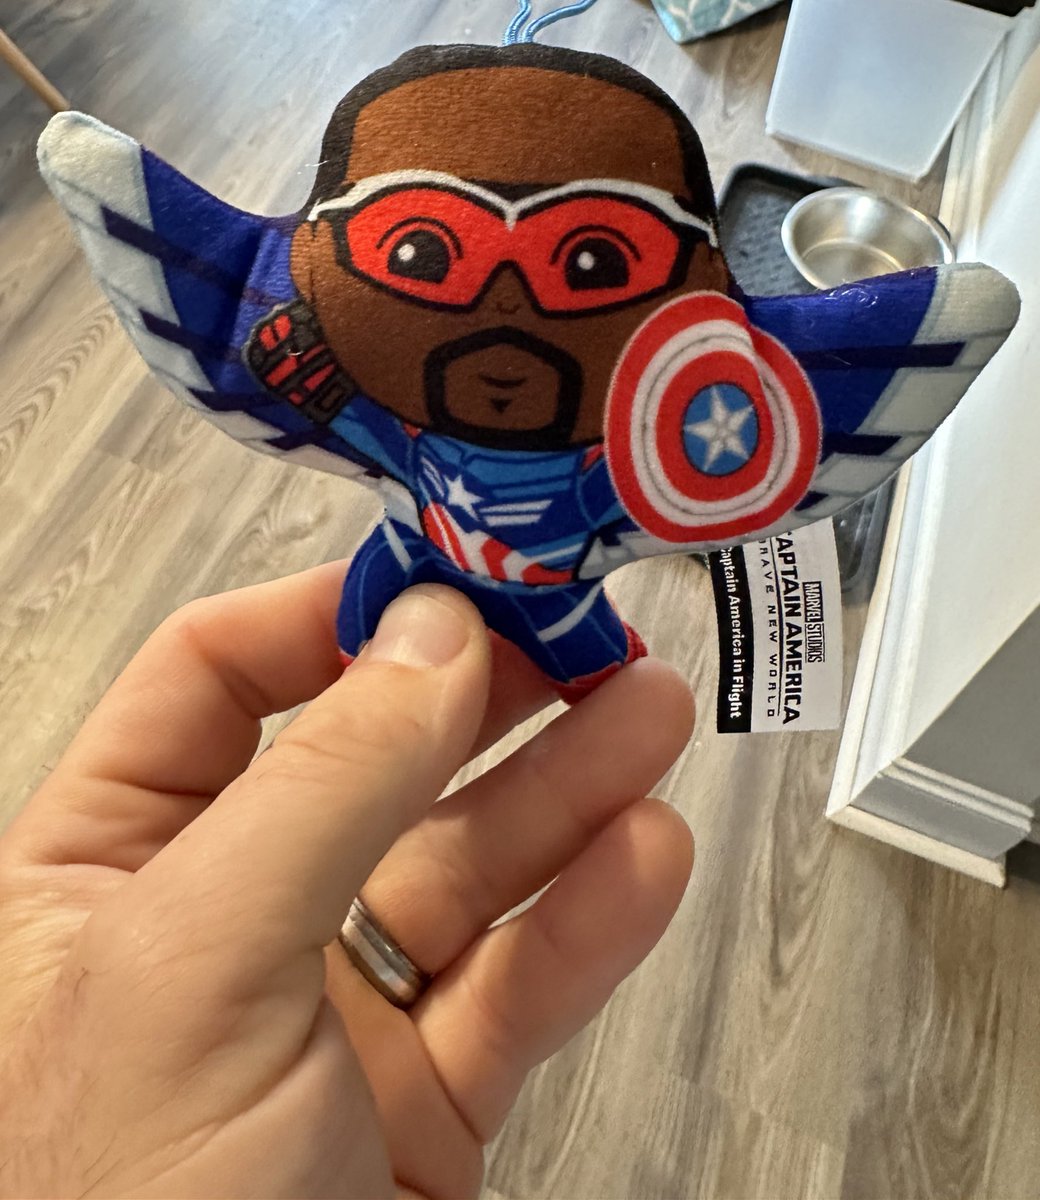 Our 5 year old is in a super hero phase, so she’s pretty excited that she got Captain America in her Happy Meal from McDonald’s